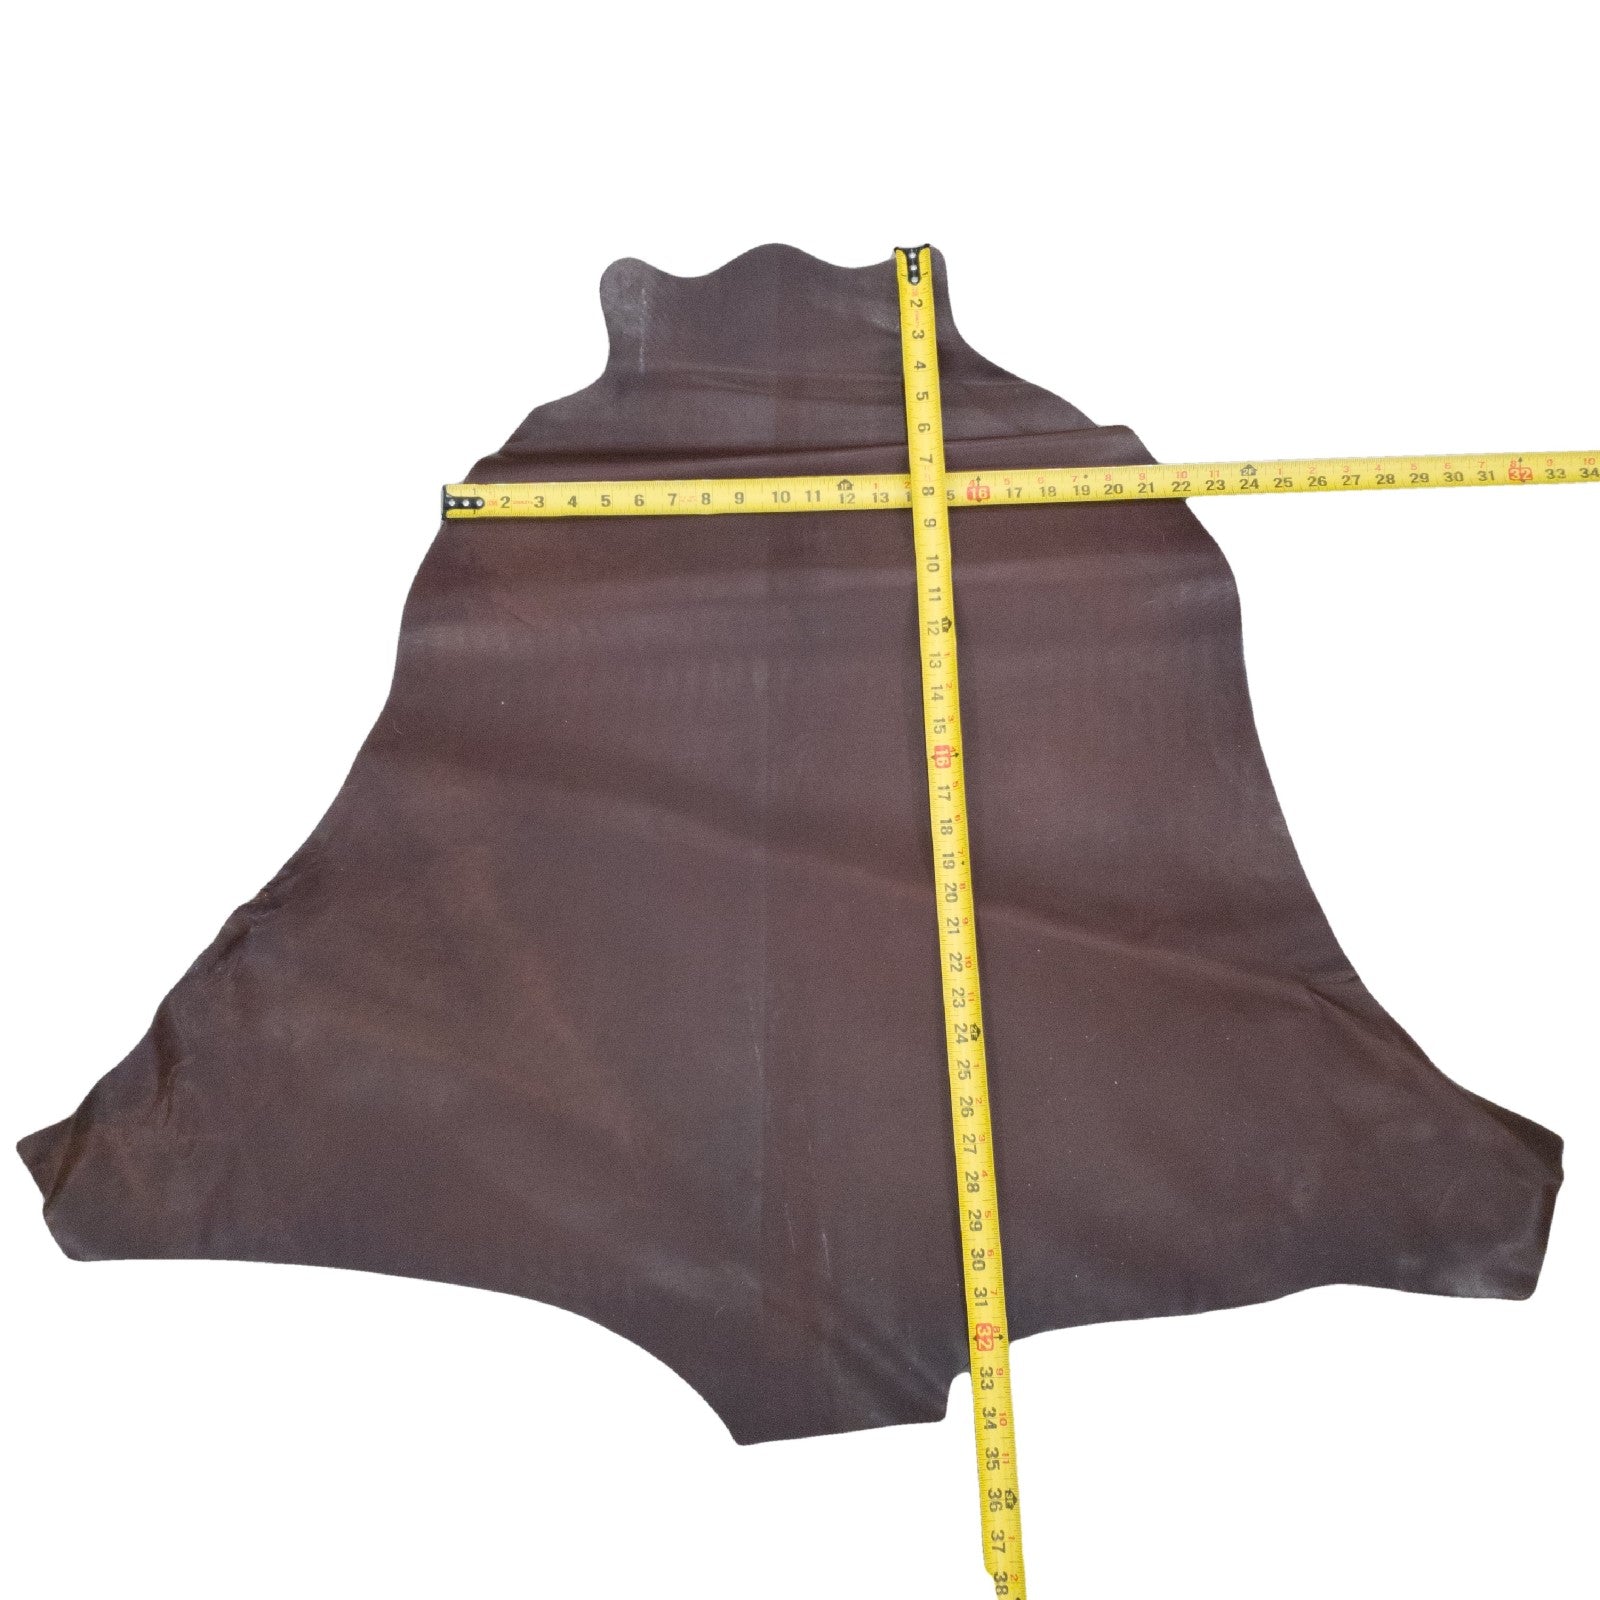 Kangaroo Chocolate Dyed Veg Tanned 5 - 7 Sq Ft Hides 2-3 oz, 6 Sq Ft / Hide 1 | The Leather Guy